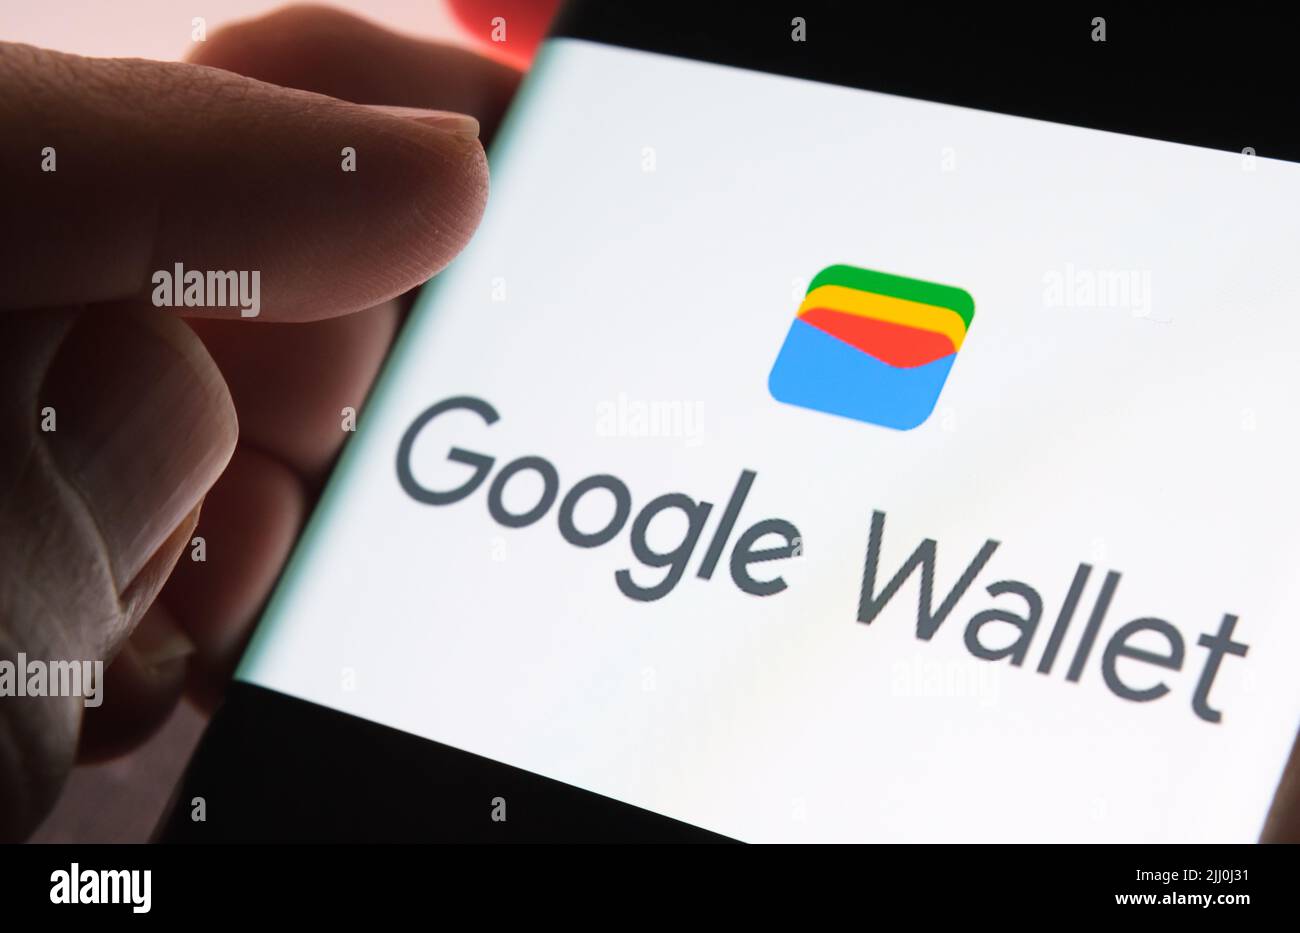 New Google Wallet logotype seen on the screen of smartphone. Google Pay rebranded to Google Wallet. Stafford, United Kingdom, July 21, 2022 Stock Photo